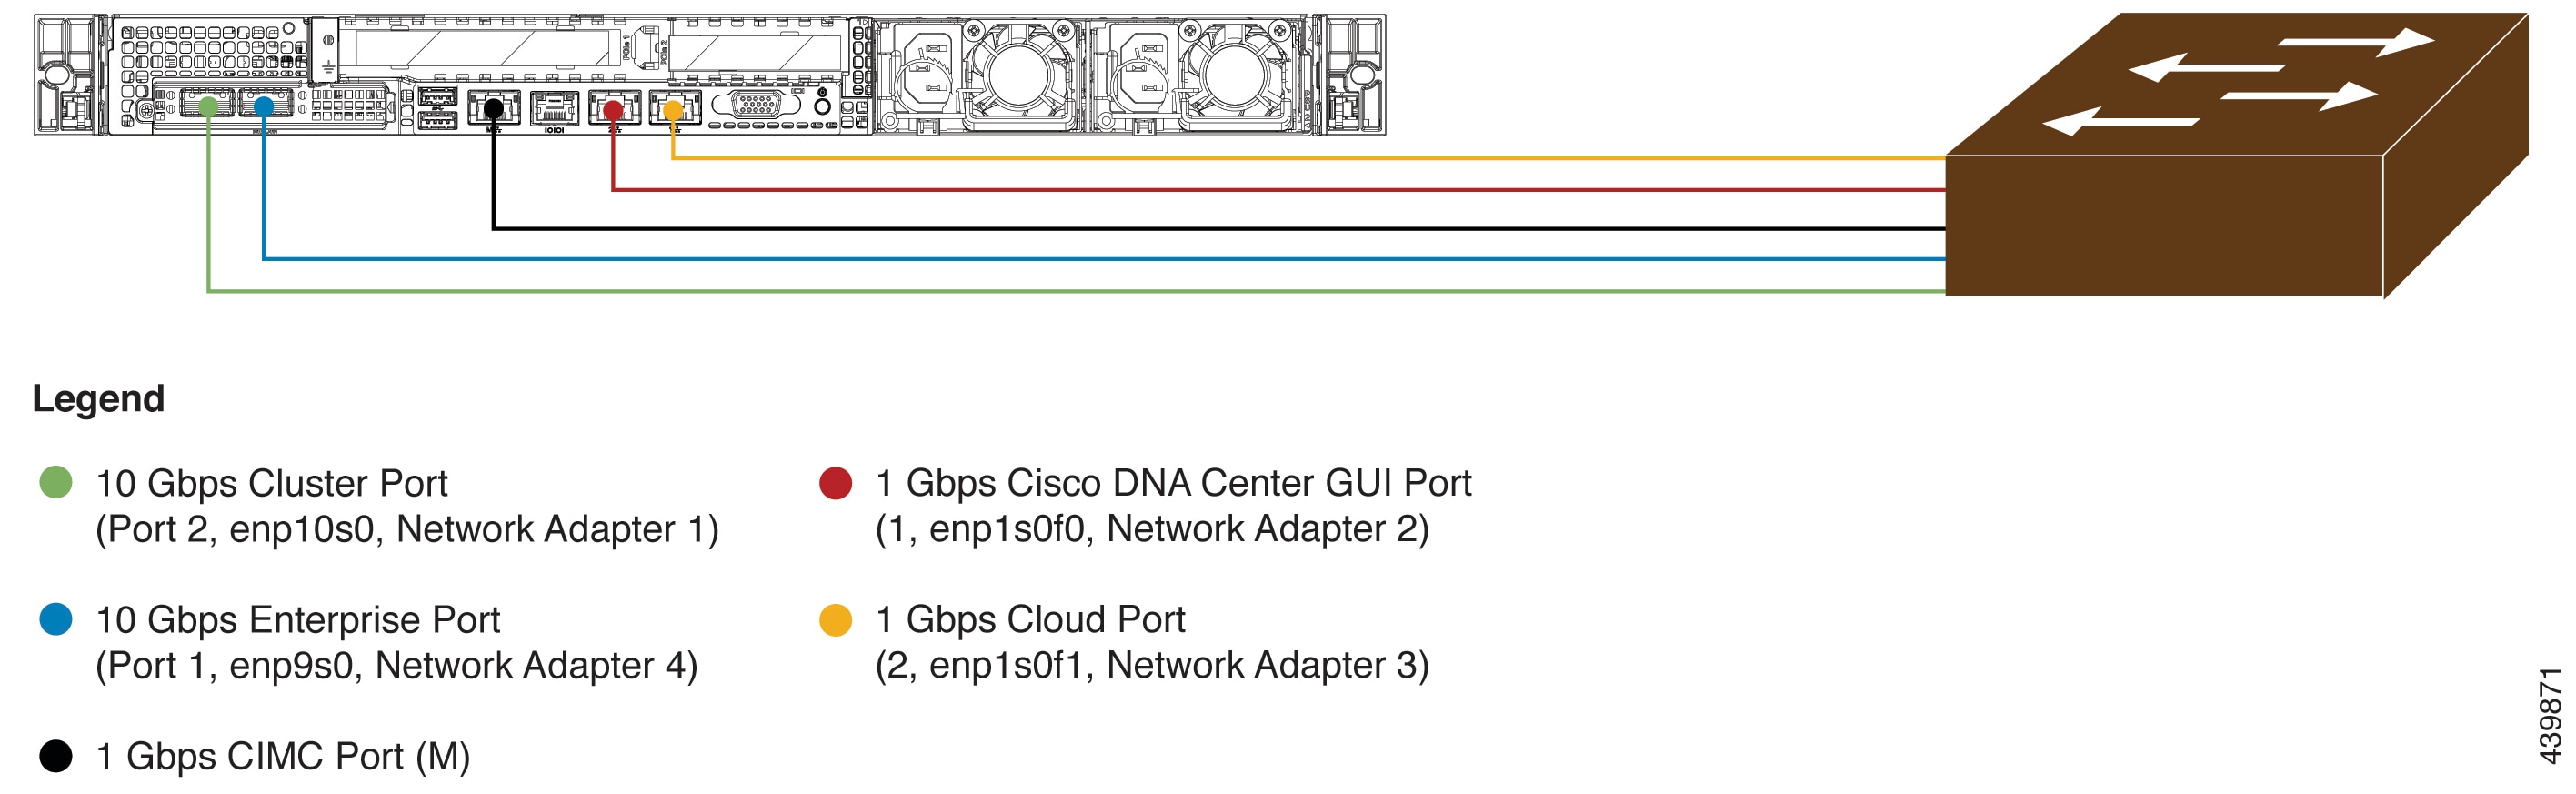 Figure 3: Recommended Cabling for Single-Node Cisco DNA Center Cluster